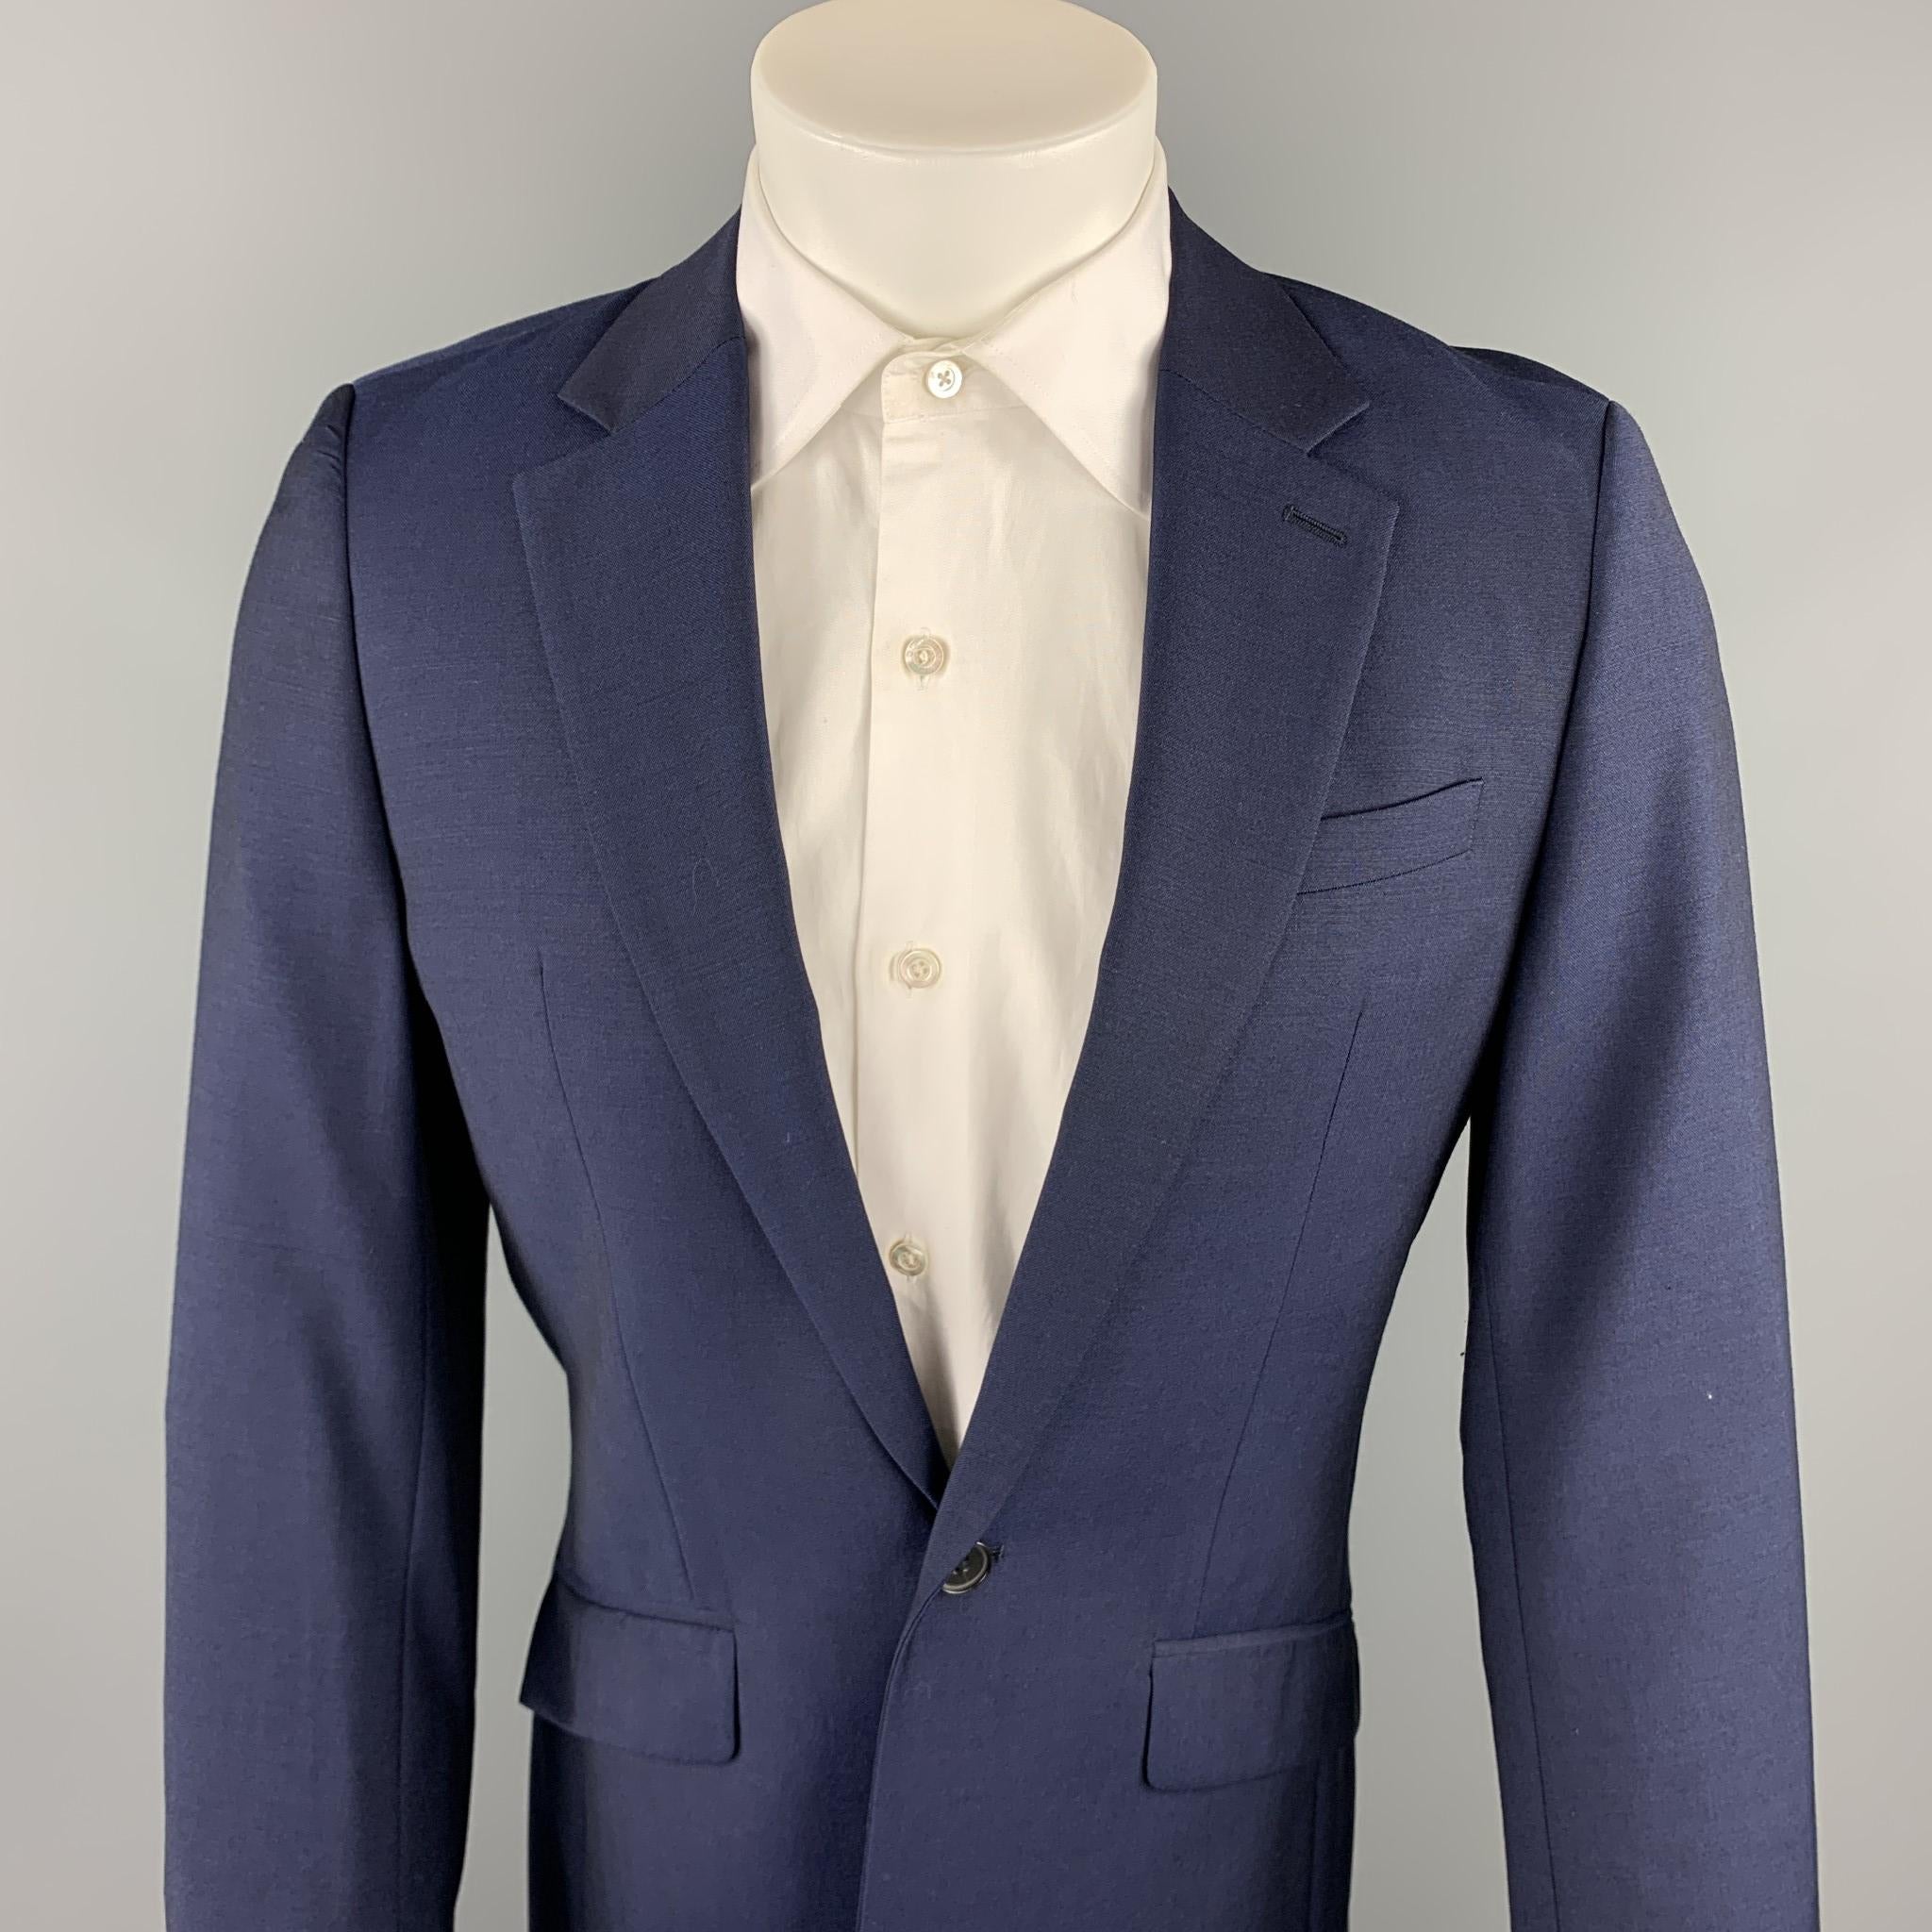 REISS suit comes in a navy wool with a full liner and includes a single breasted, single button sport coat with a notch lapel and matching flat front trousers. 

Excellent Pre-Owned Condition.
Marked: 36

Measurements:

-Jacket
Shoulder: 17